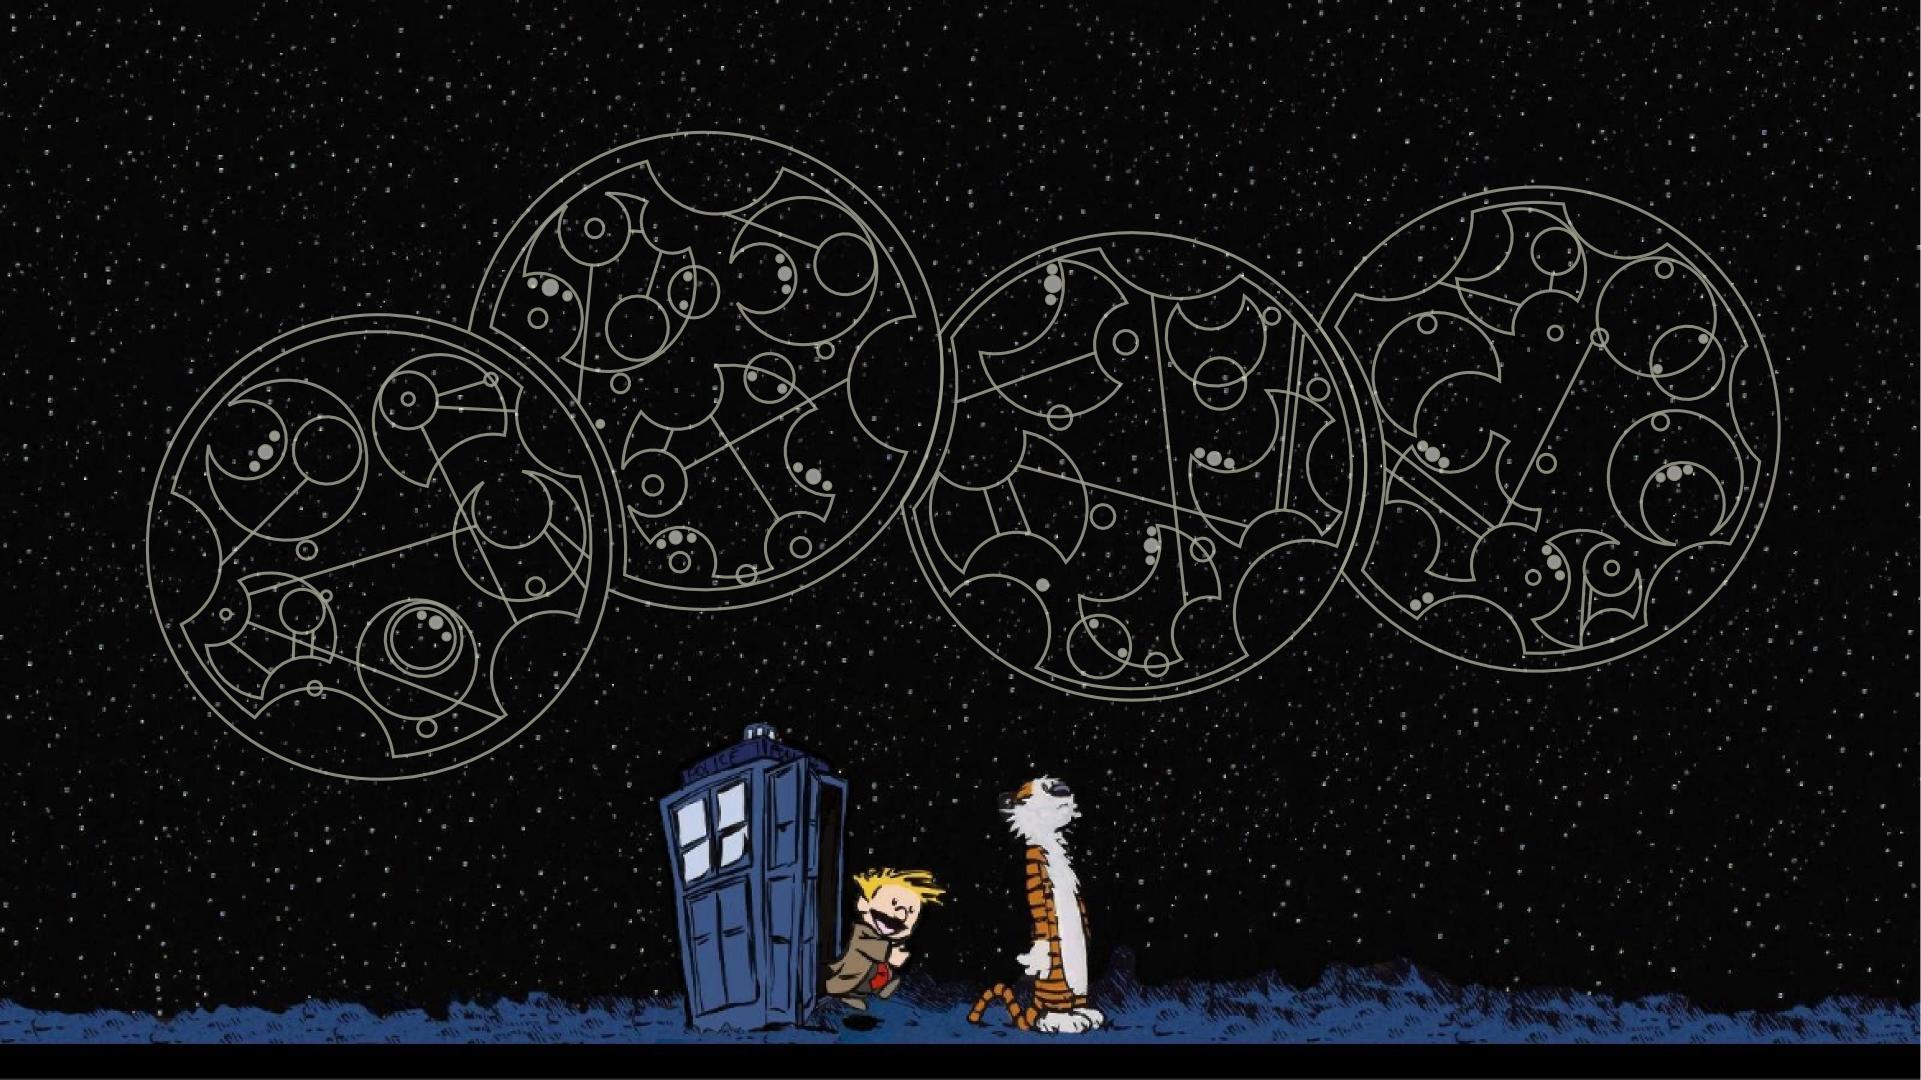 Made A Gallifreyan Quote To Add One Of My Favorite Wallpaper It